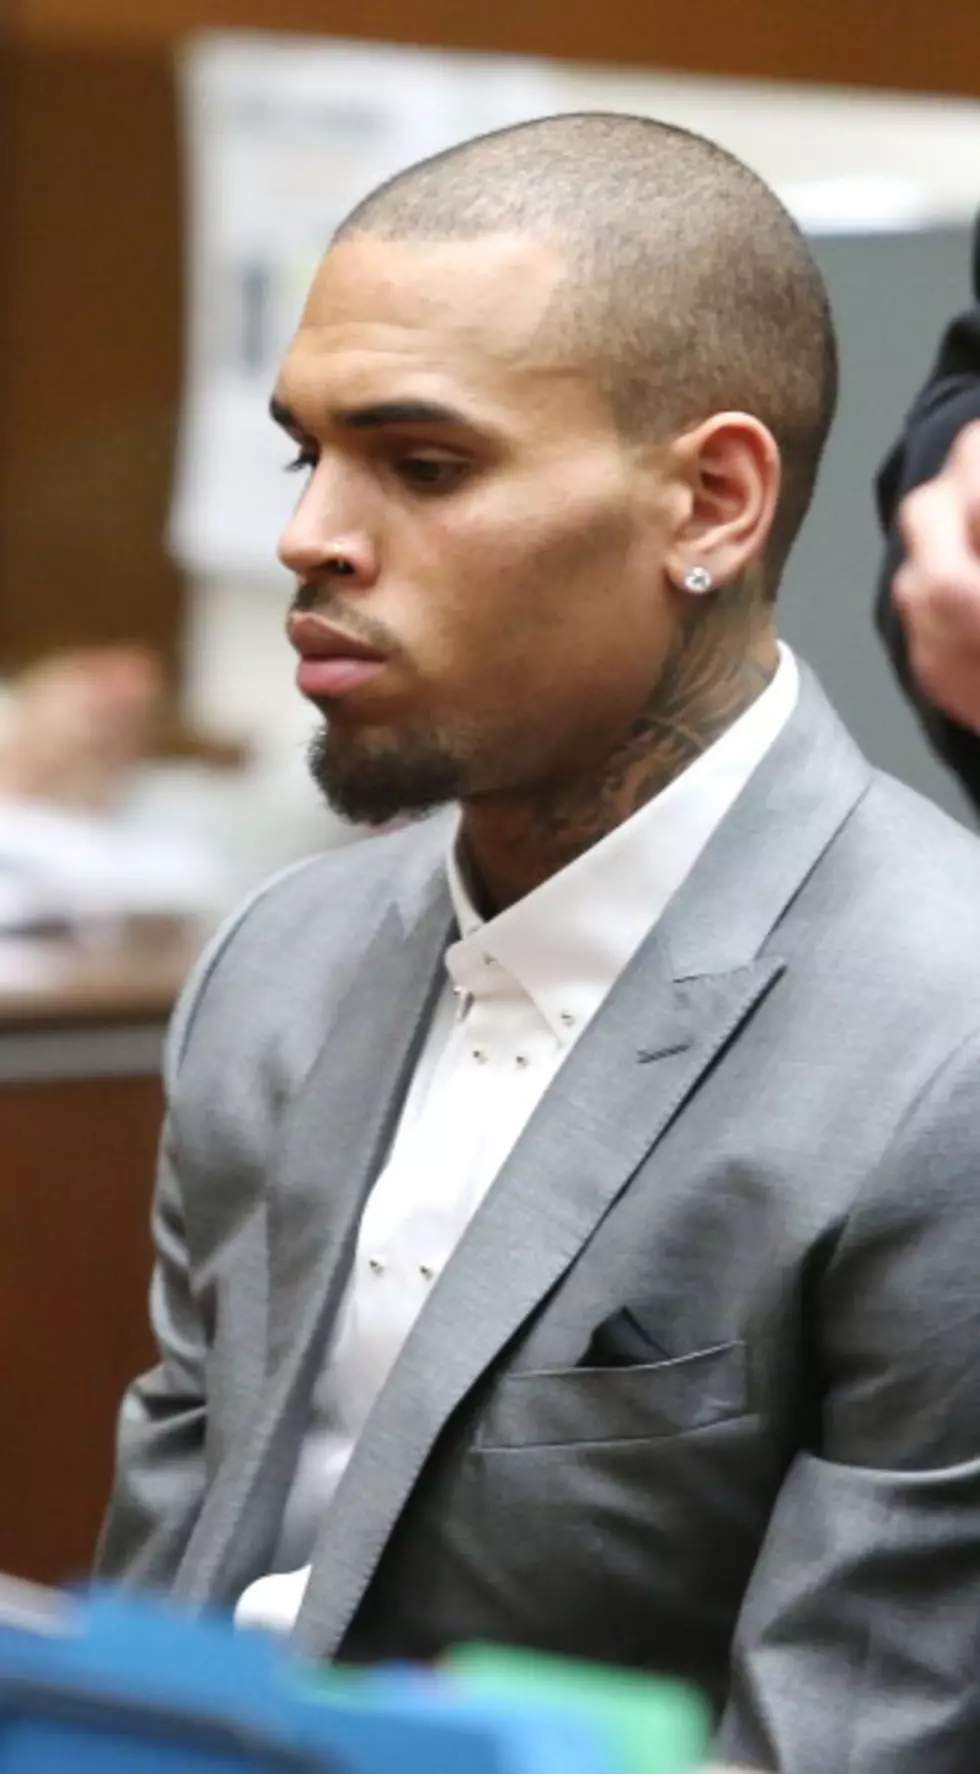 Chris Brown Accused of Alleged Assault Again